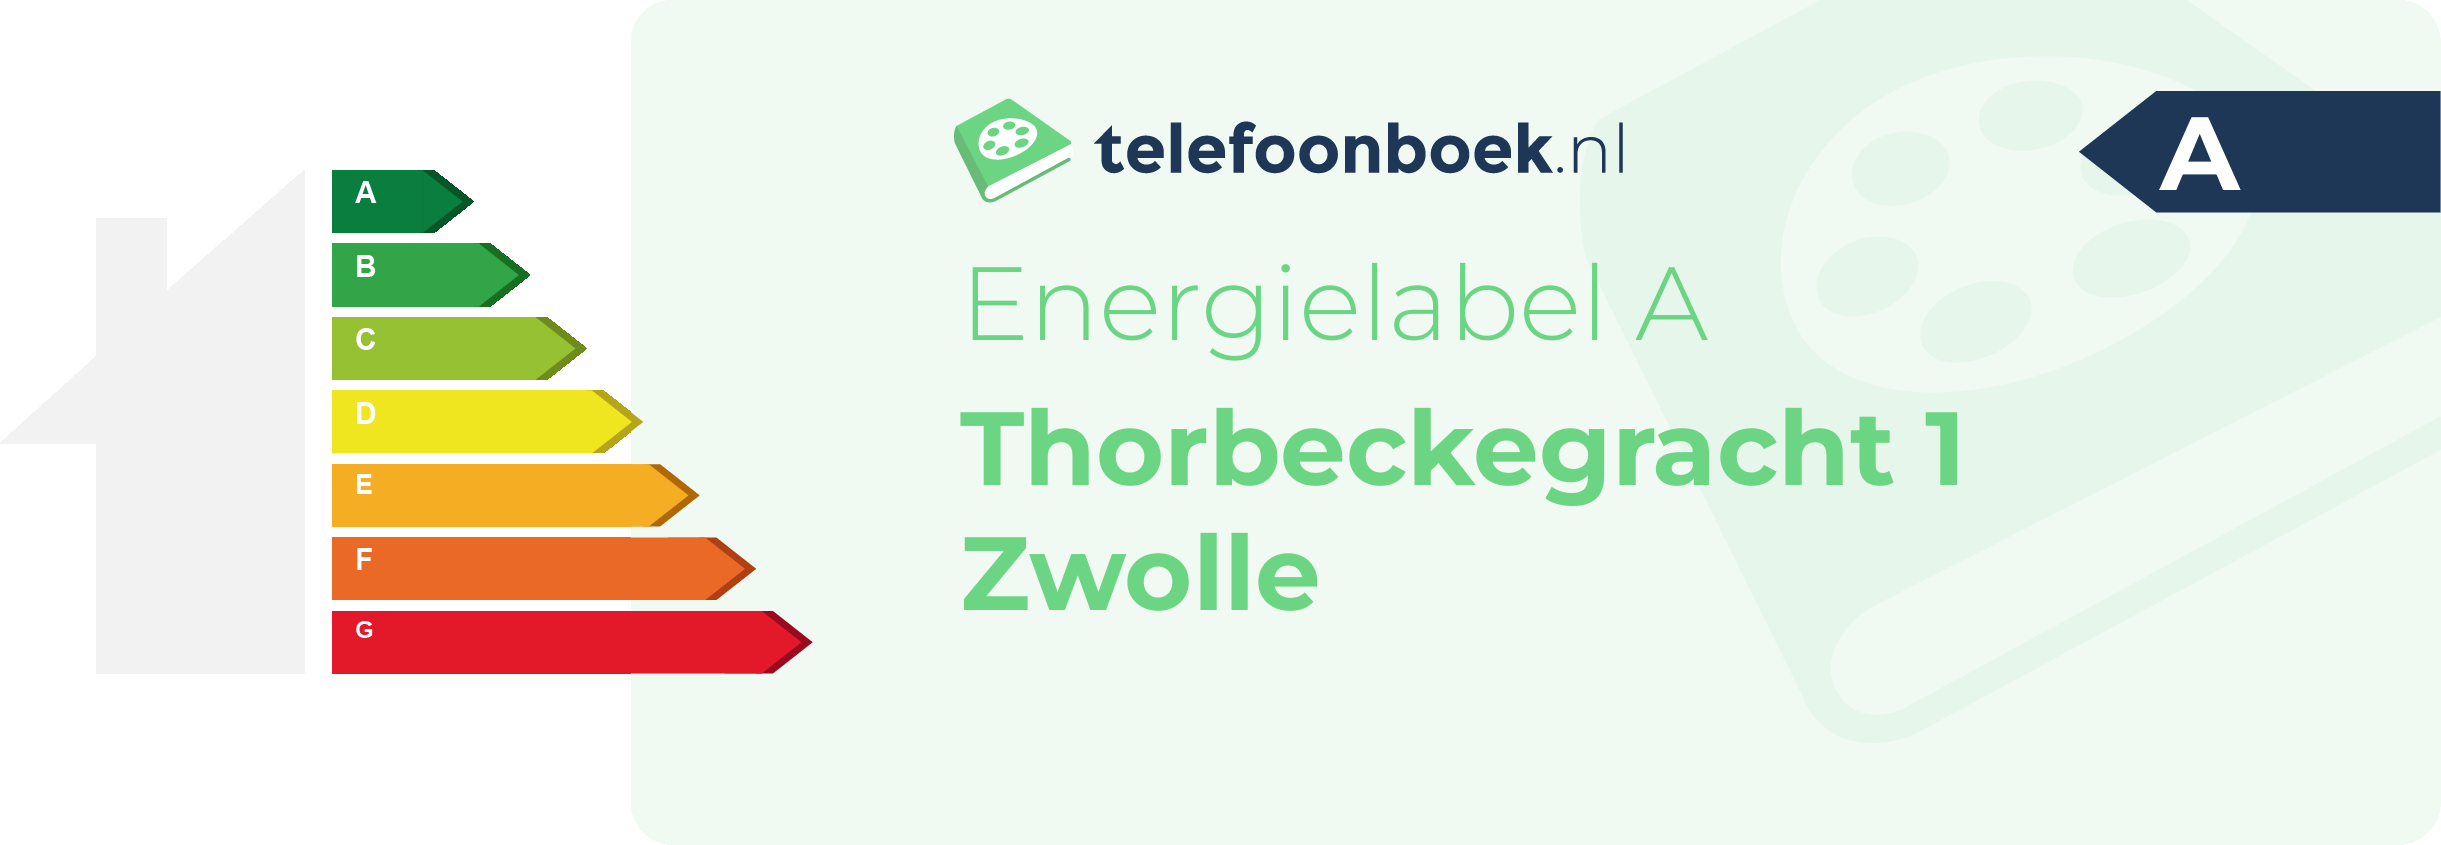 Energielabel Thorbeckegracht 1 Zwolle